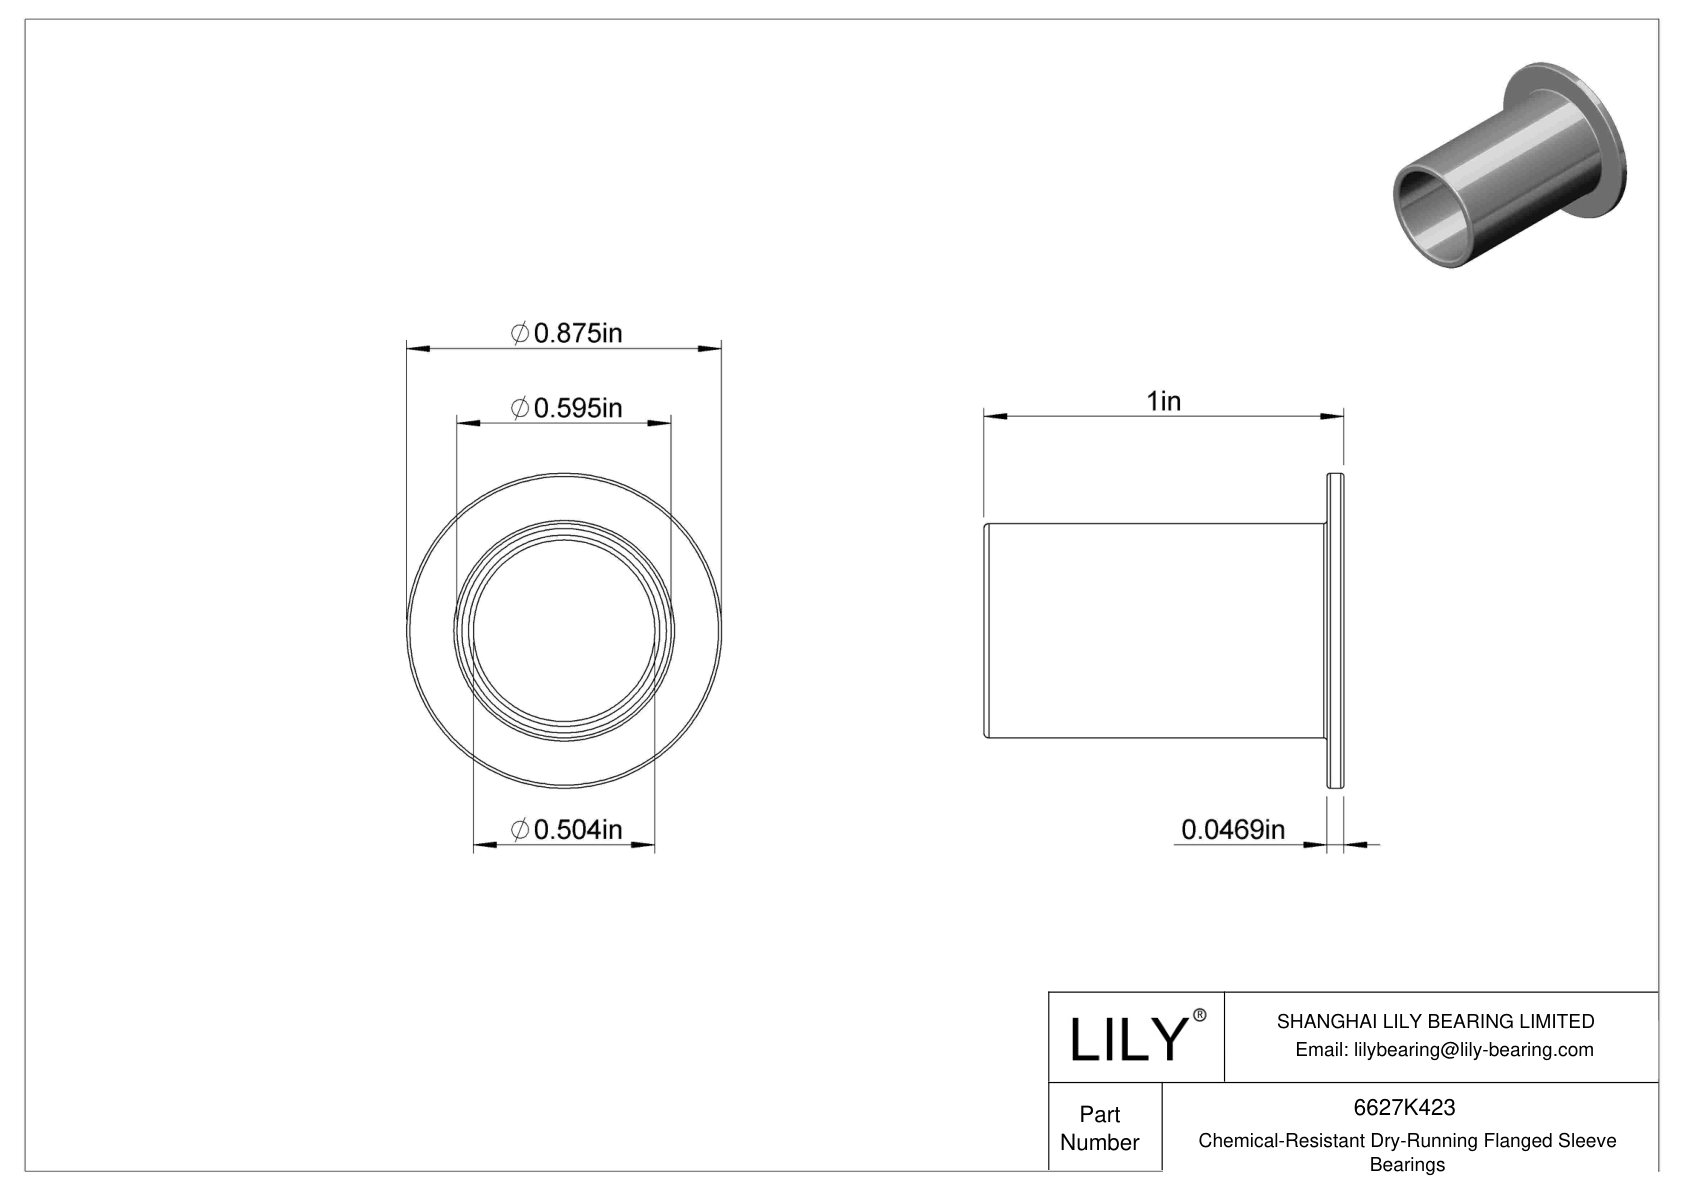 GGCHKECD Chemical-Resistant Dry-Running Flanged Sleeve Bearings cad drawing